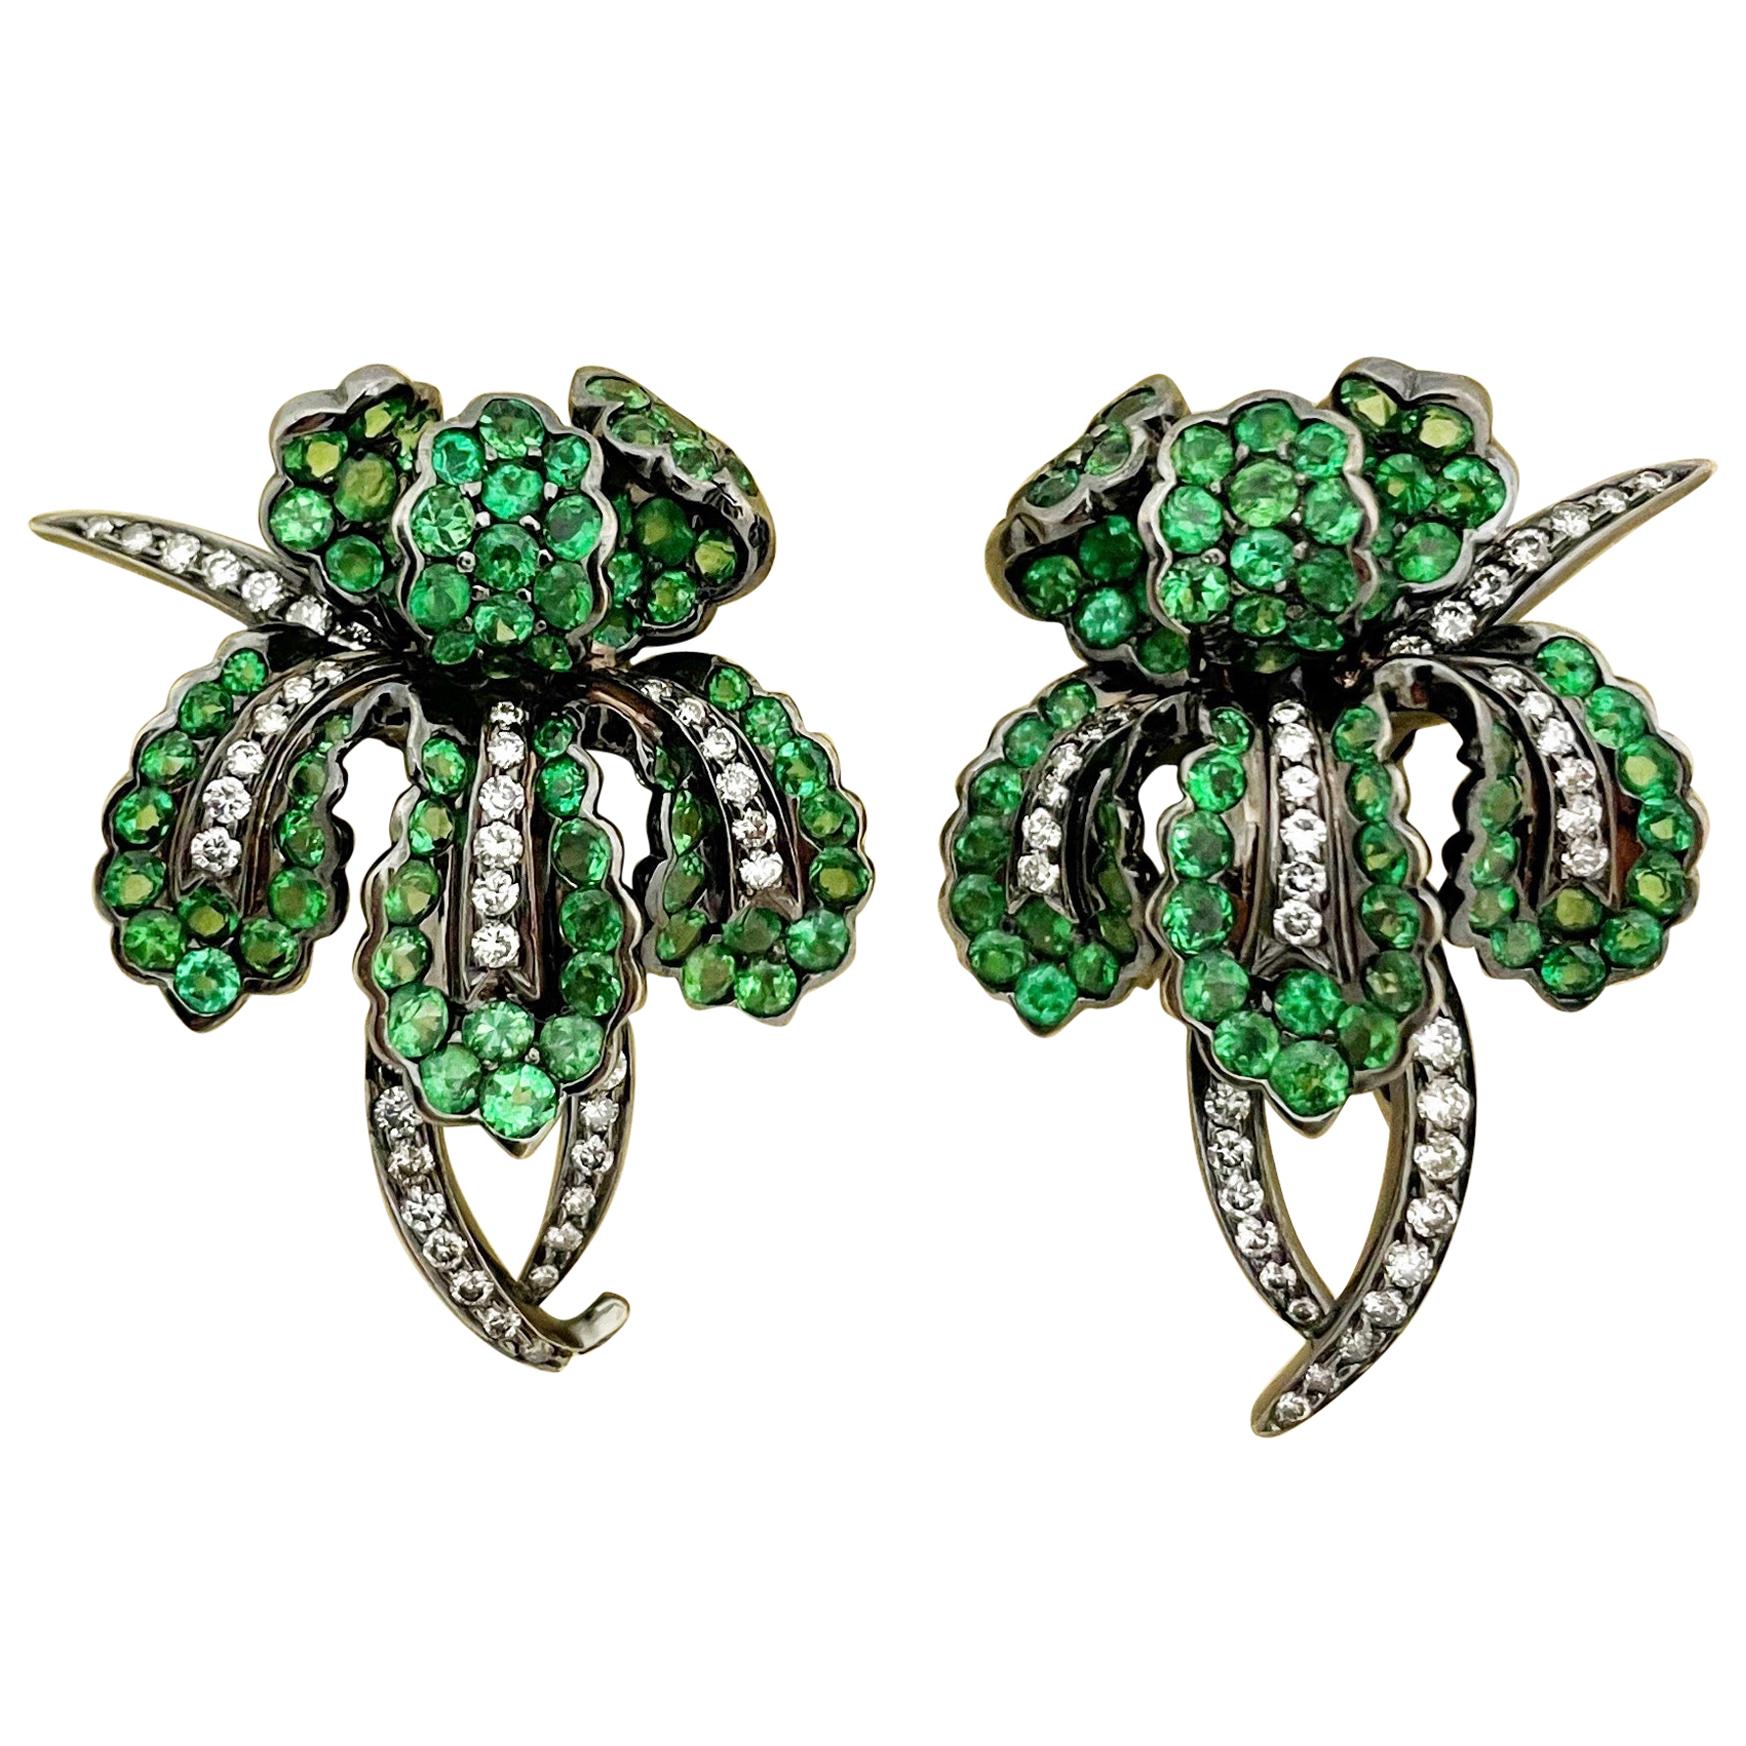 Cellini 18kt Blackened Gold 1.10ct Diamond and 6.85ct Tsavorite Orchid Earrings